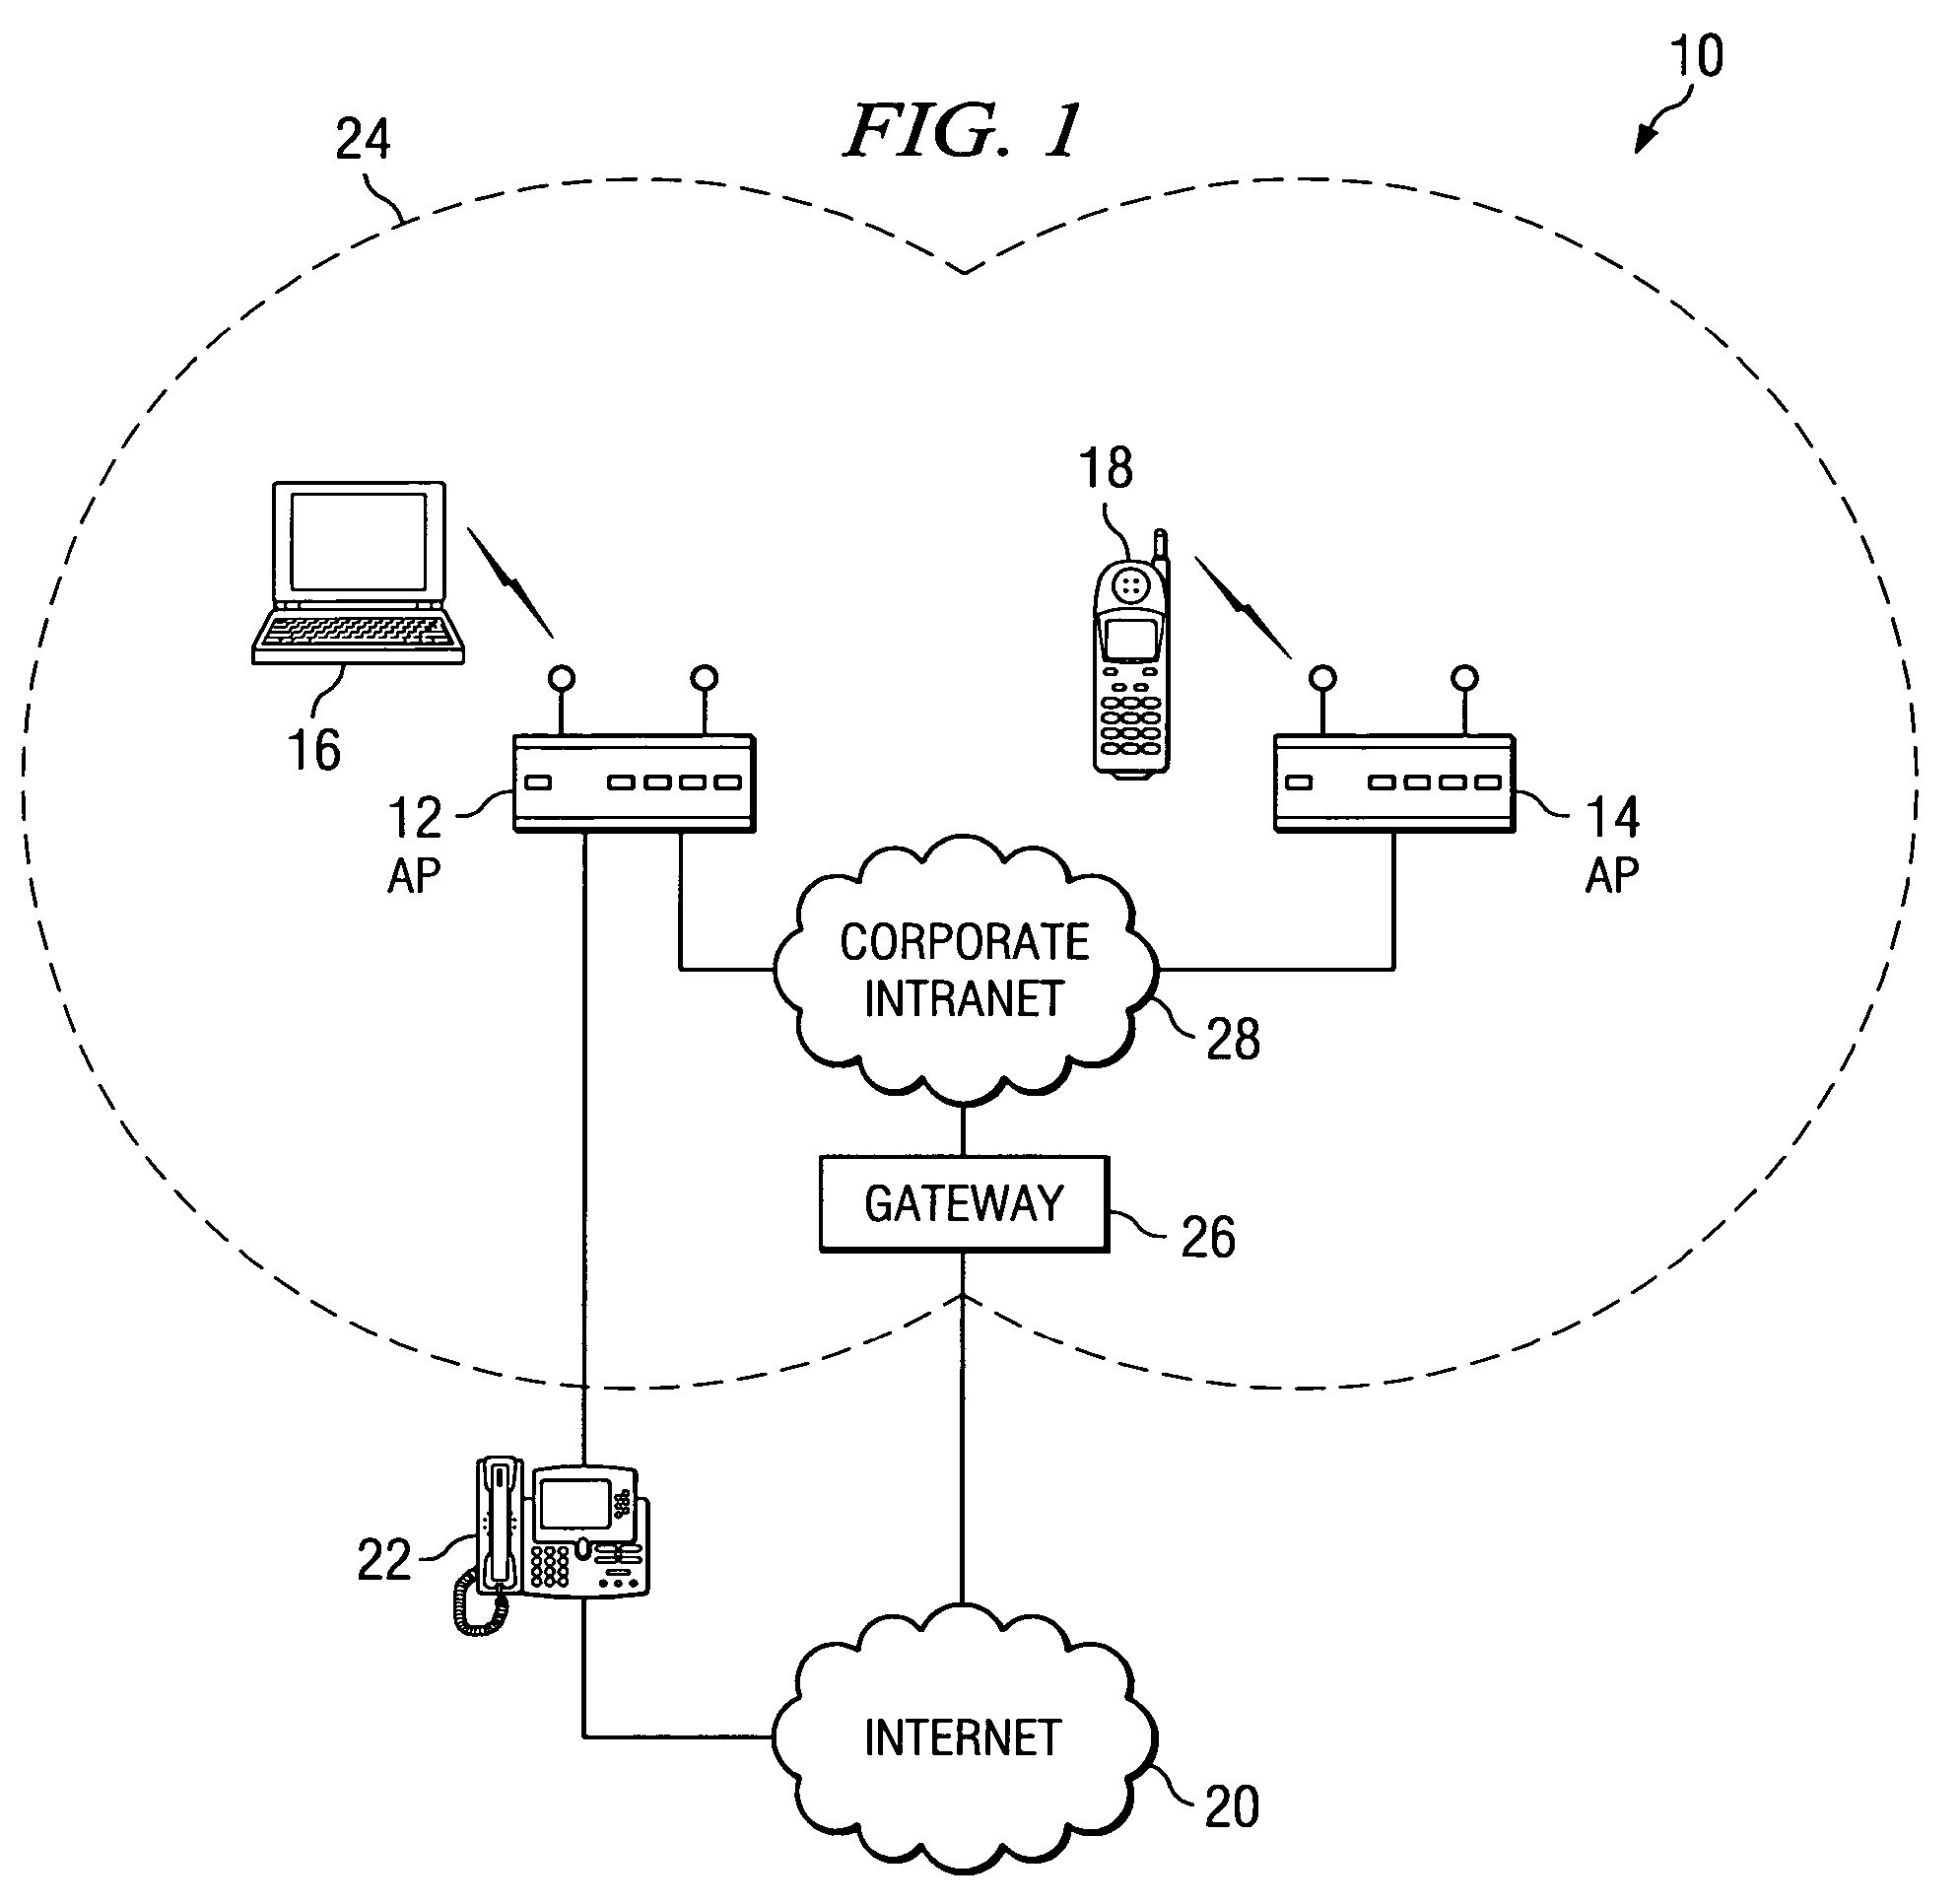 Unconnected power save mode for improving battery life of wireless stations in wireless local area networks